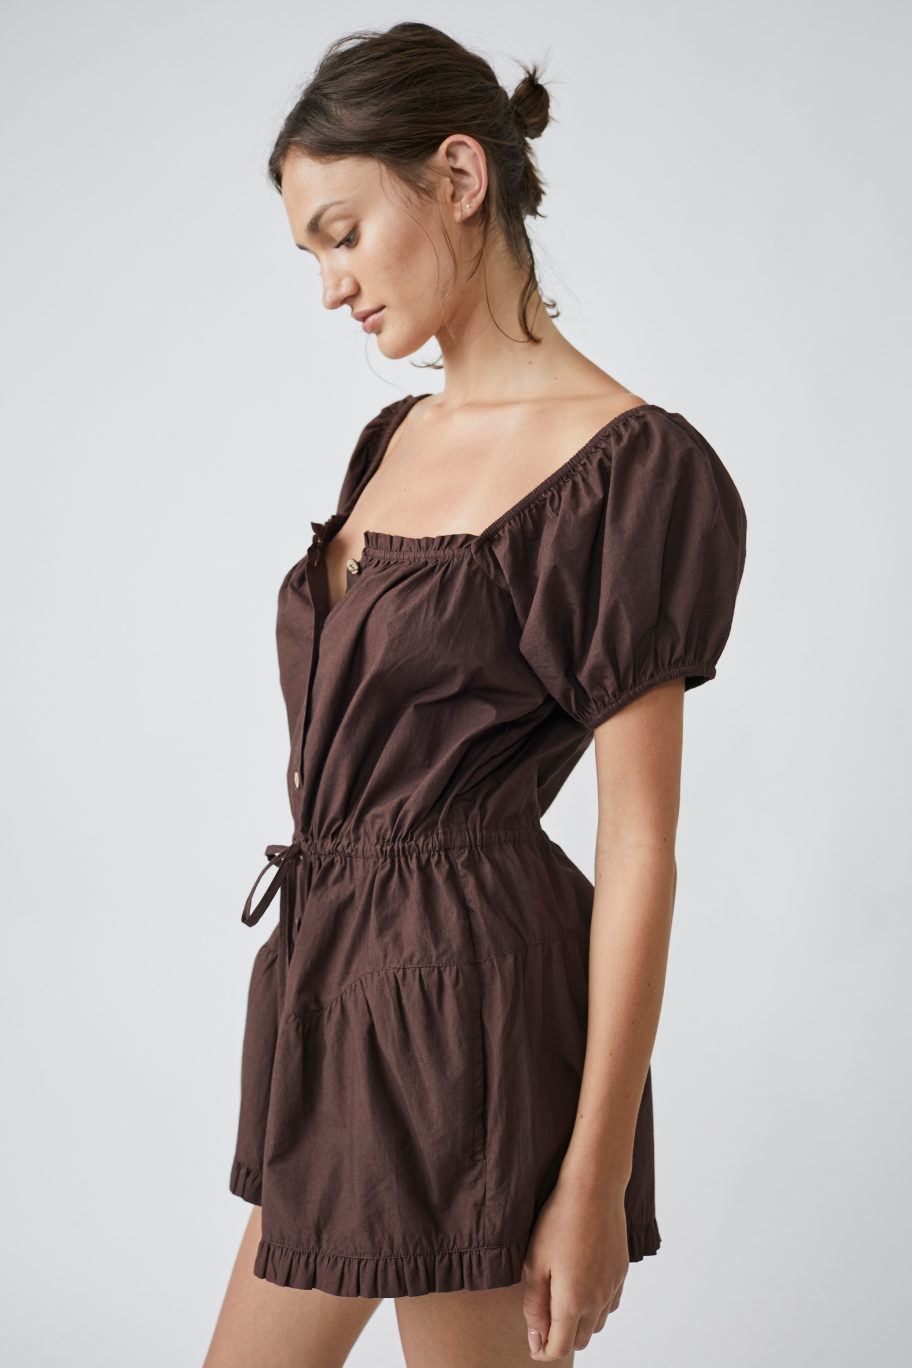 FREE PEOPLE A SIGHT FOR SORE EYES ROMPER IN FRENCH ROAST